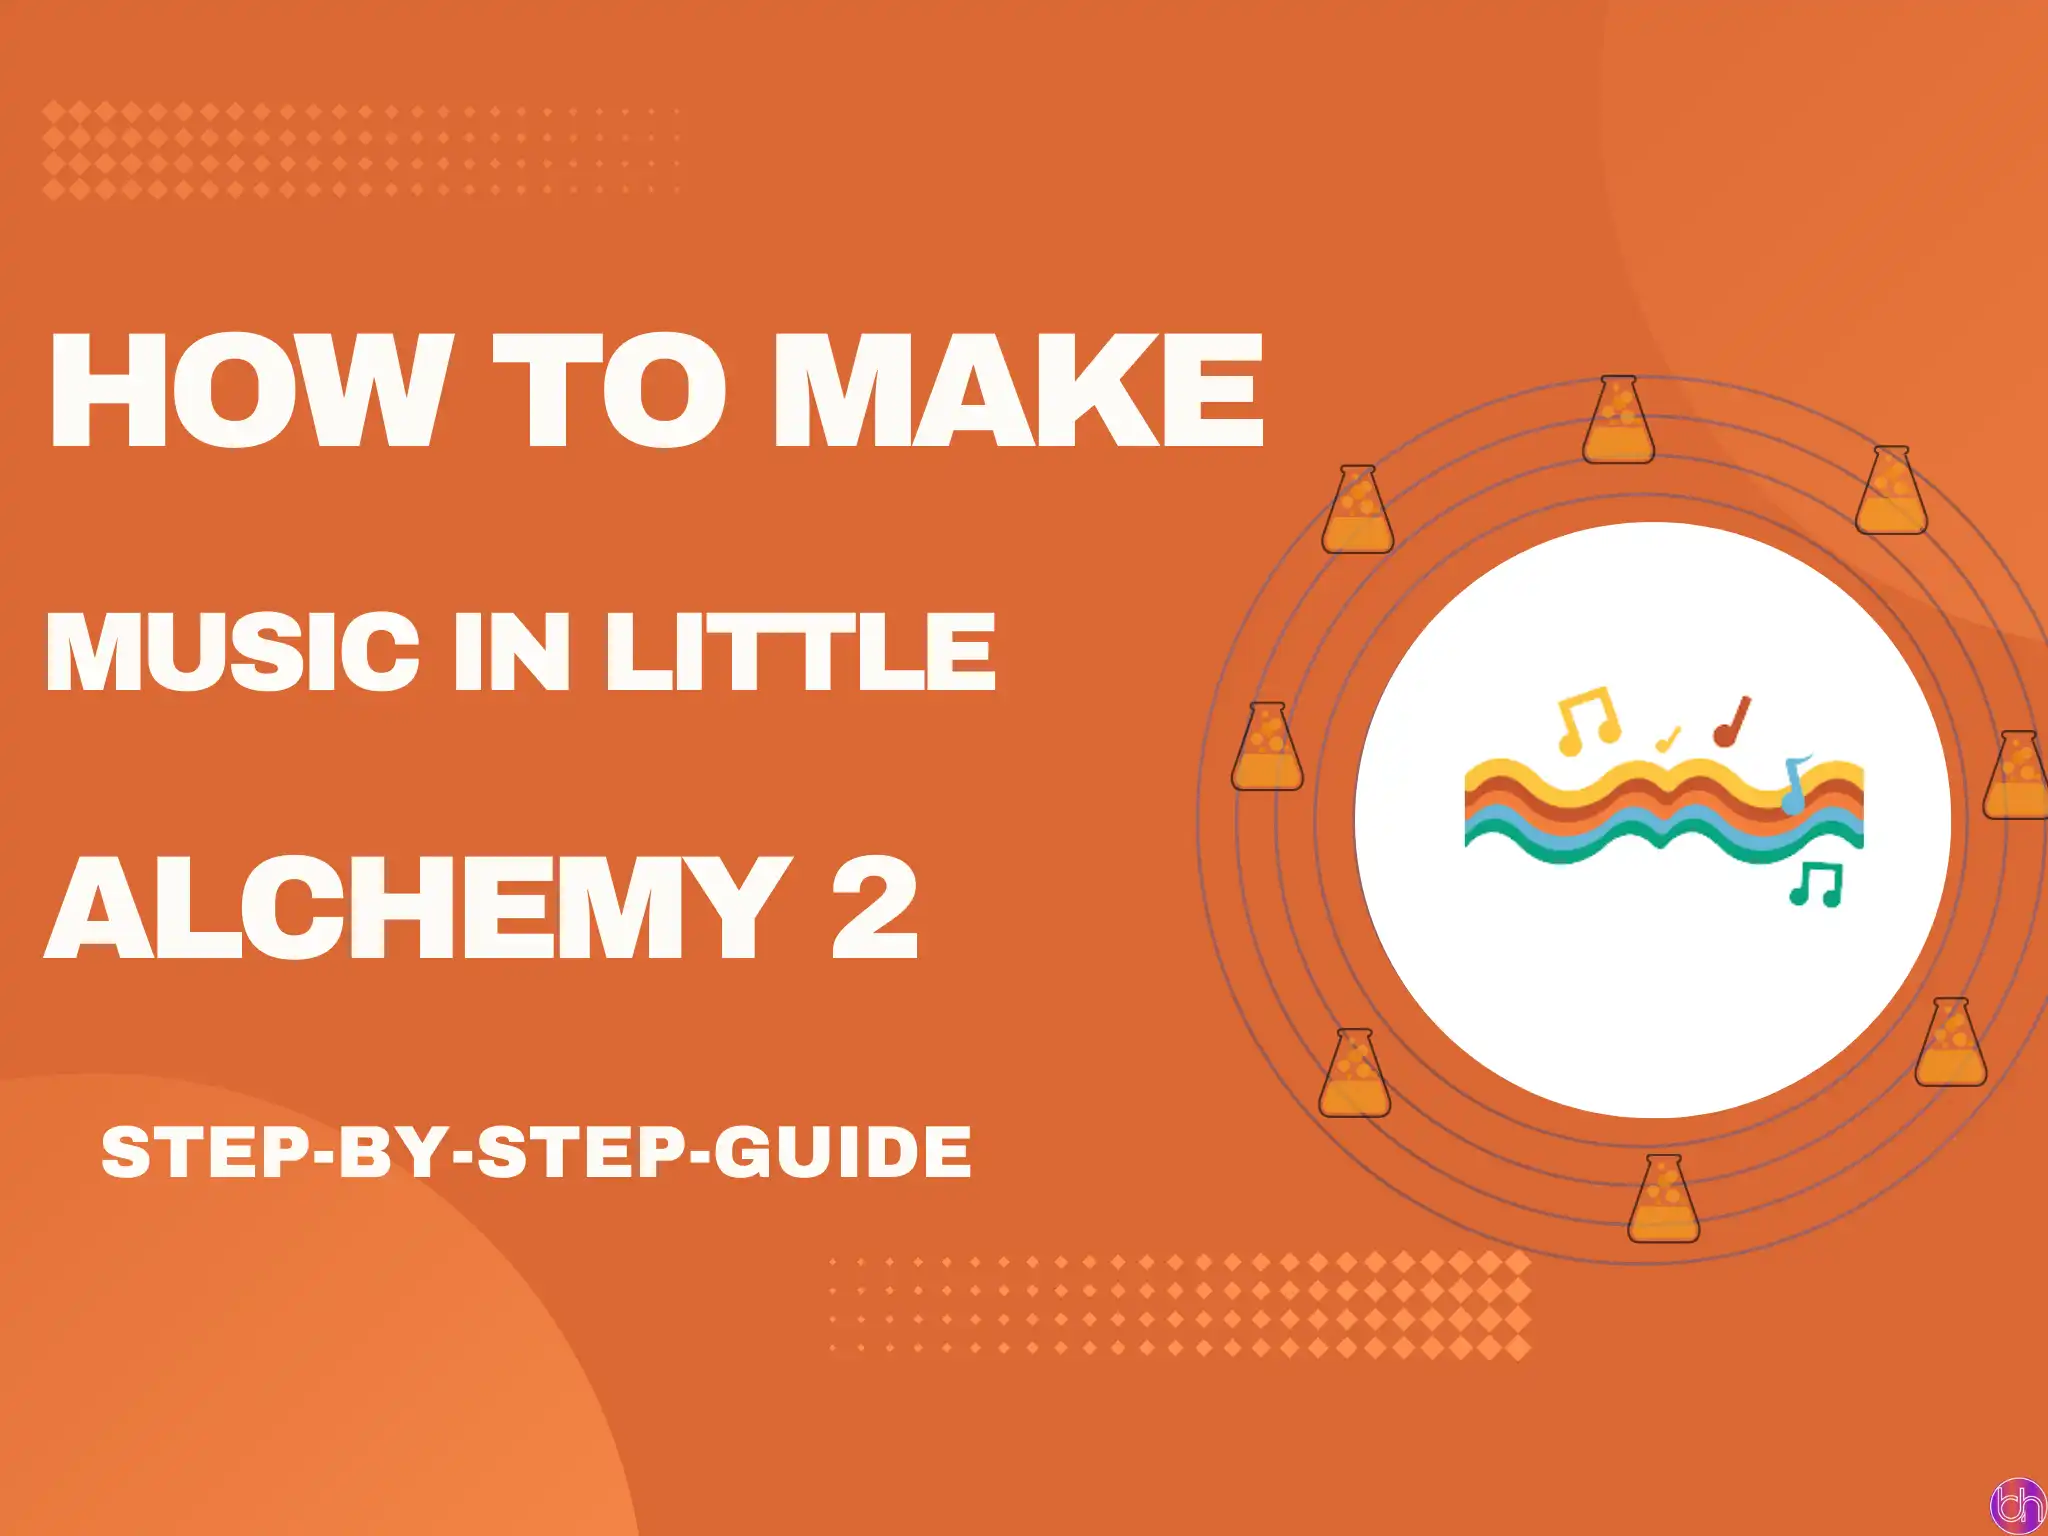 How to make Music in Little Alchemy 2